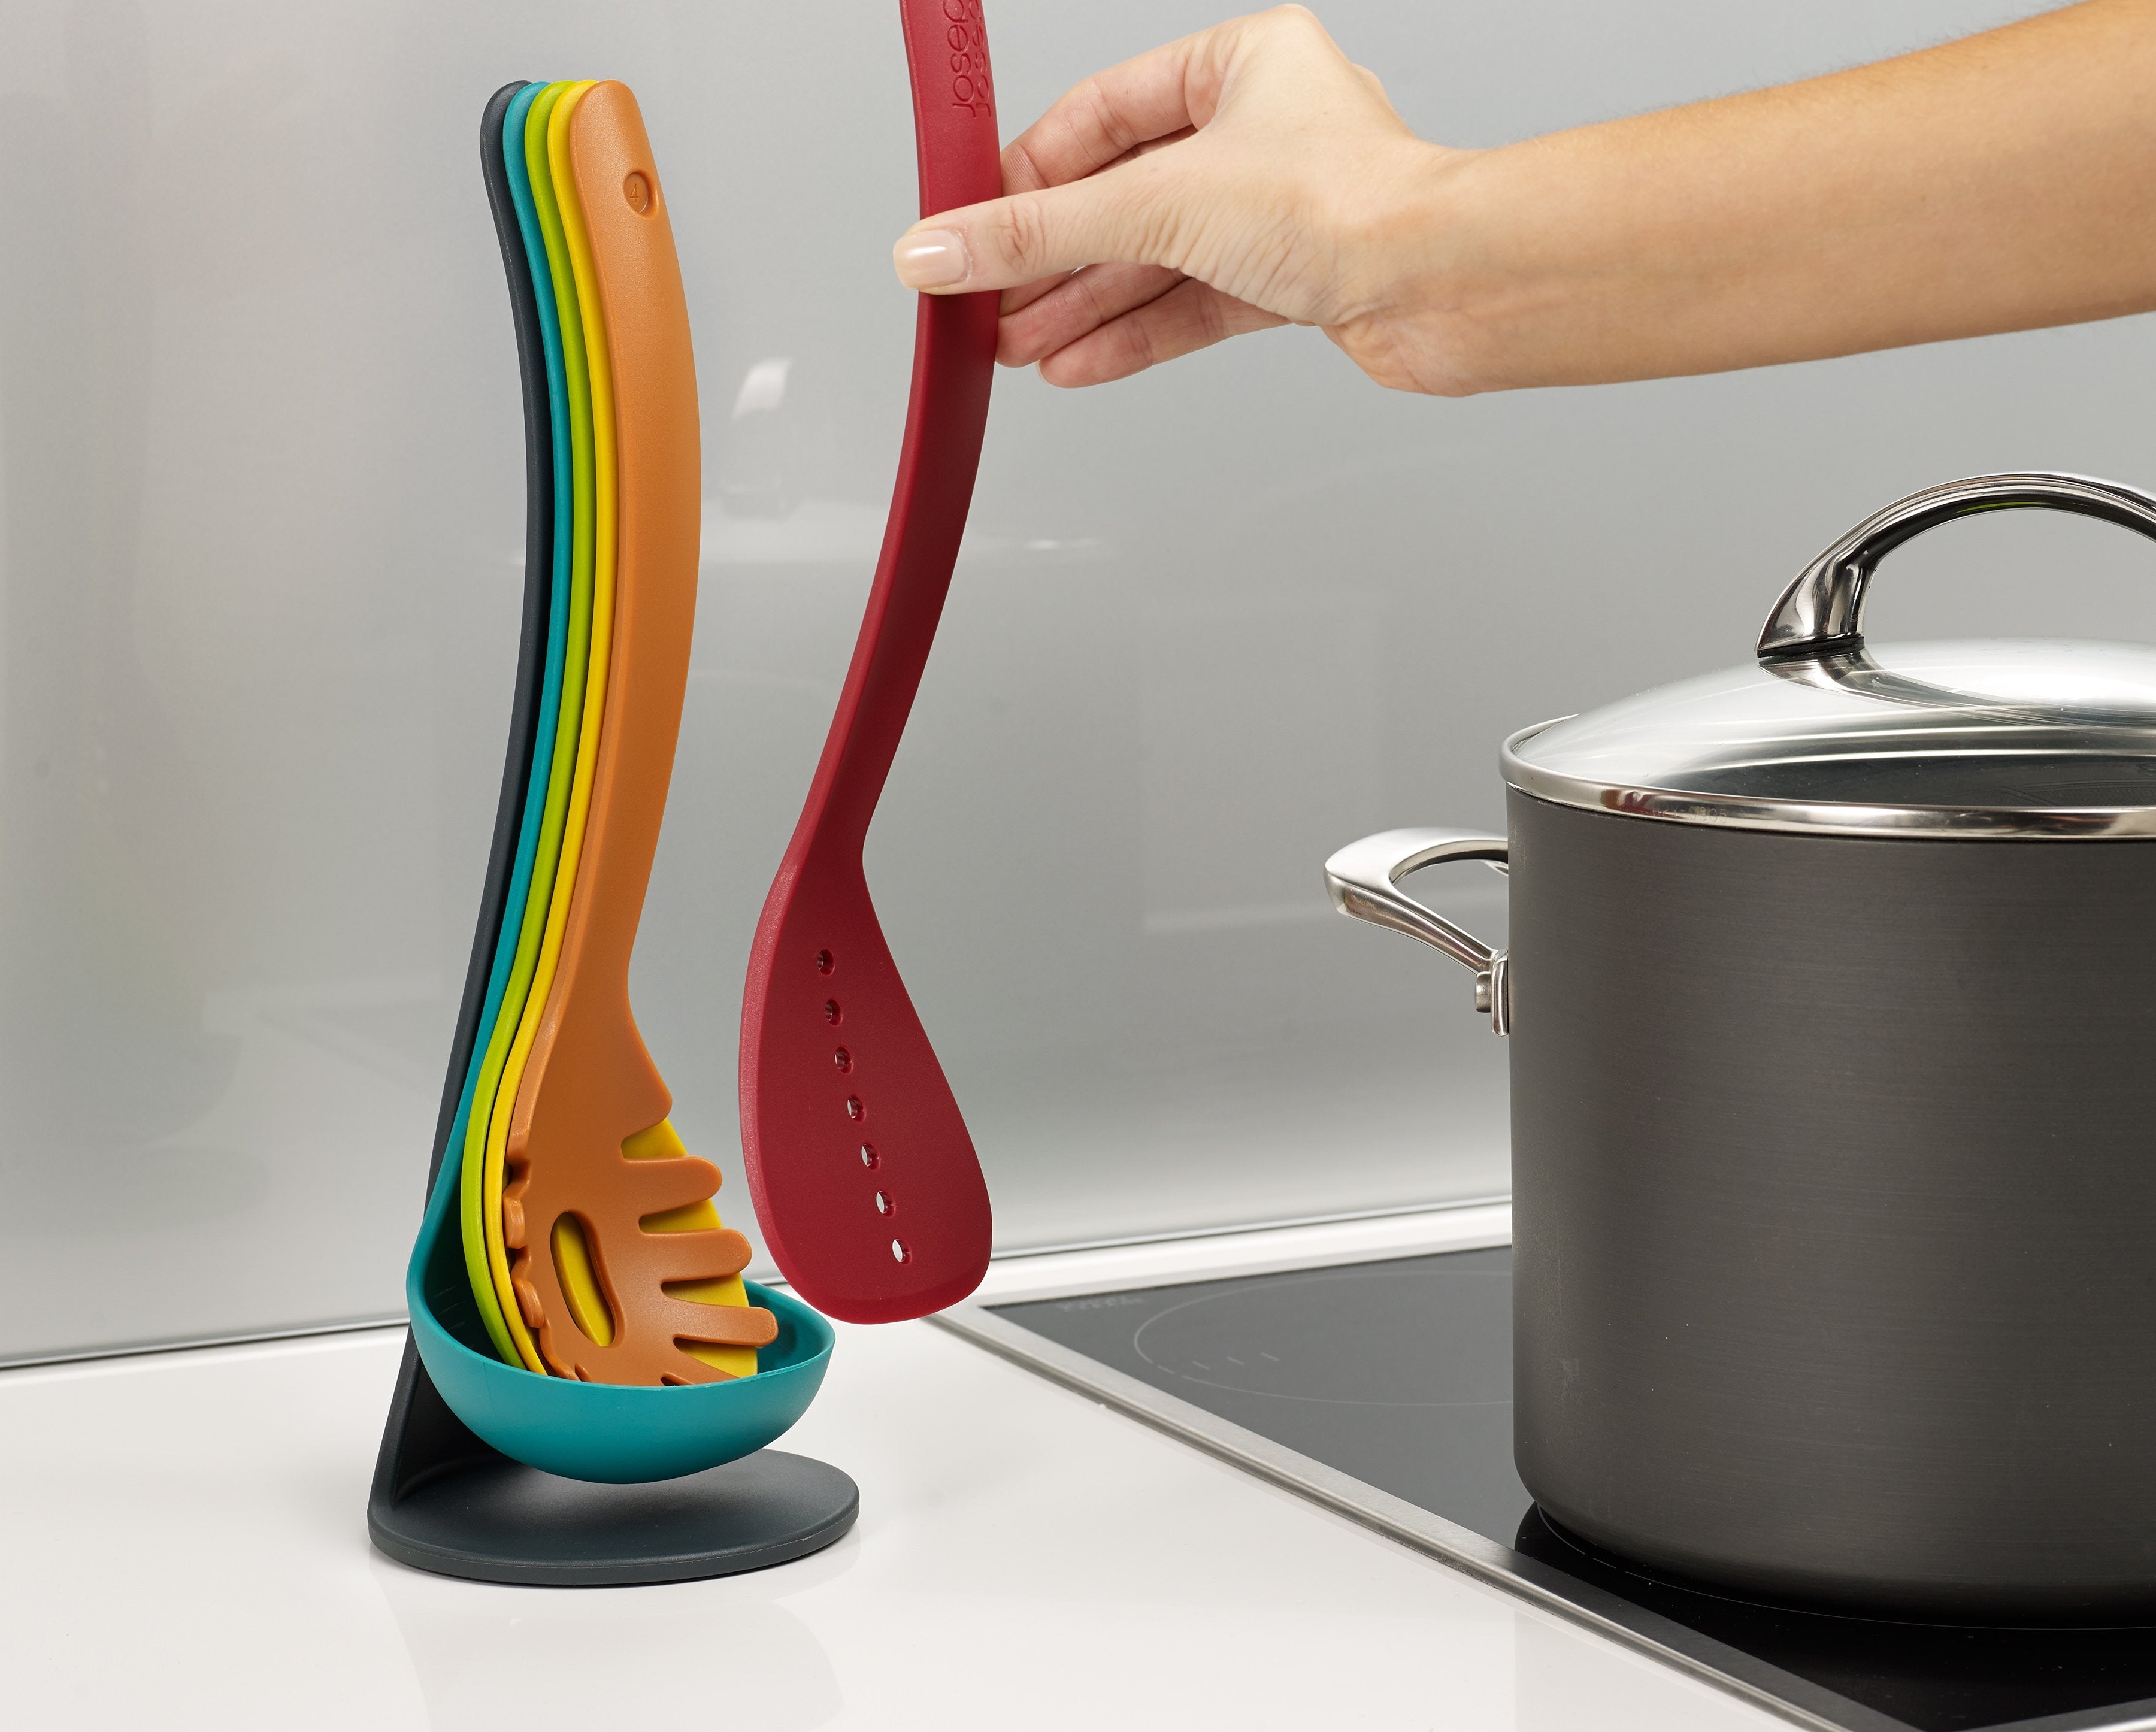 BEON.COM.AU  Perfect for keeping next to the cooker, this space-saving set is cleverly designed so the utensils stack neatly together and are held securely in place with their magnetic handles.  Set includes: slotted spatula, spaghetti server, slotted spoon, solid spoon and ladle Magnetic handles hold tools ... Joseph Joseph at BEON.COM.AU